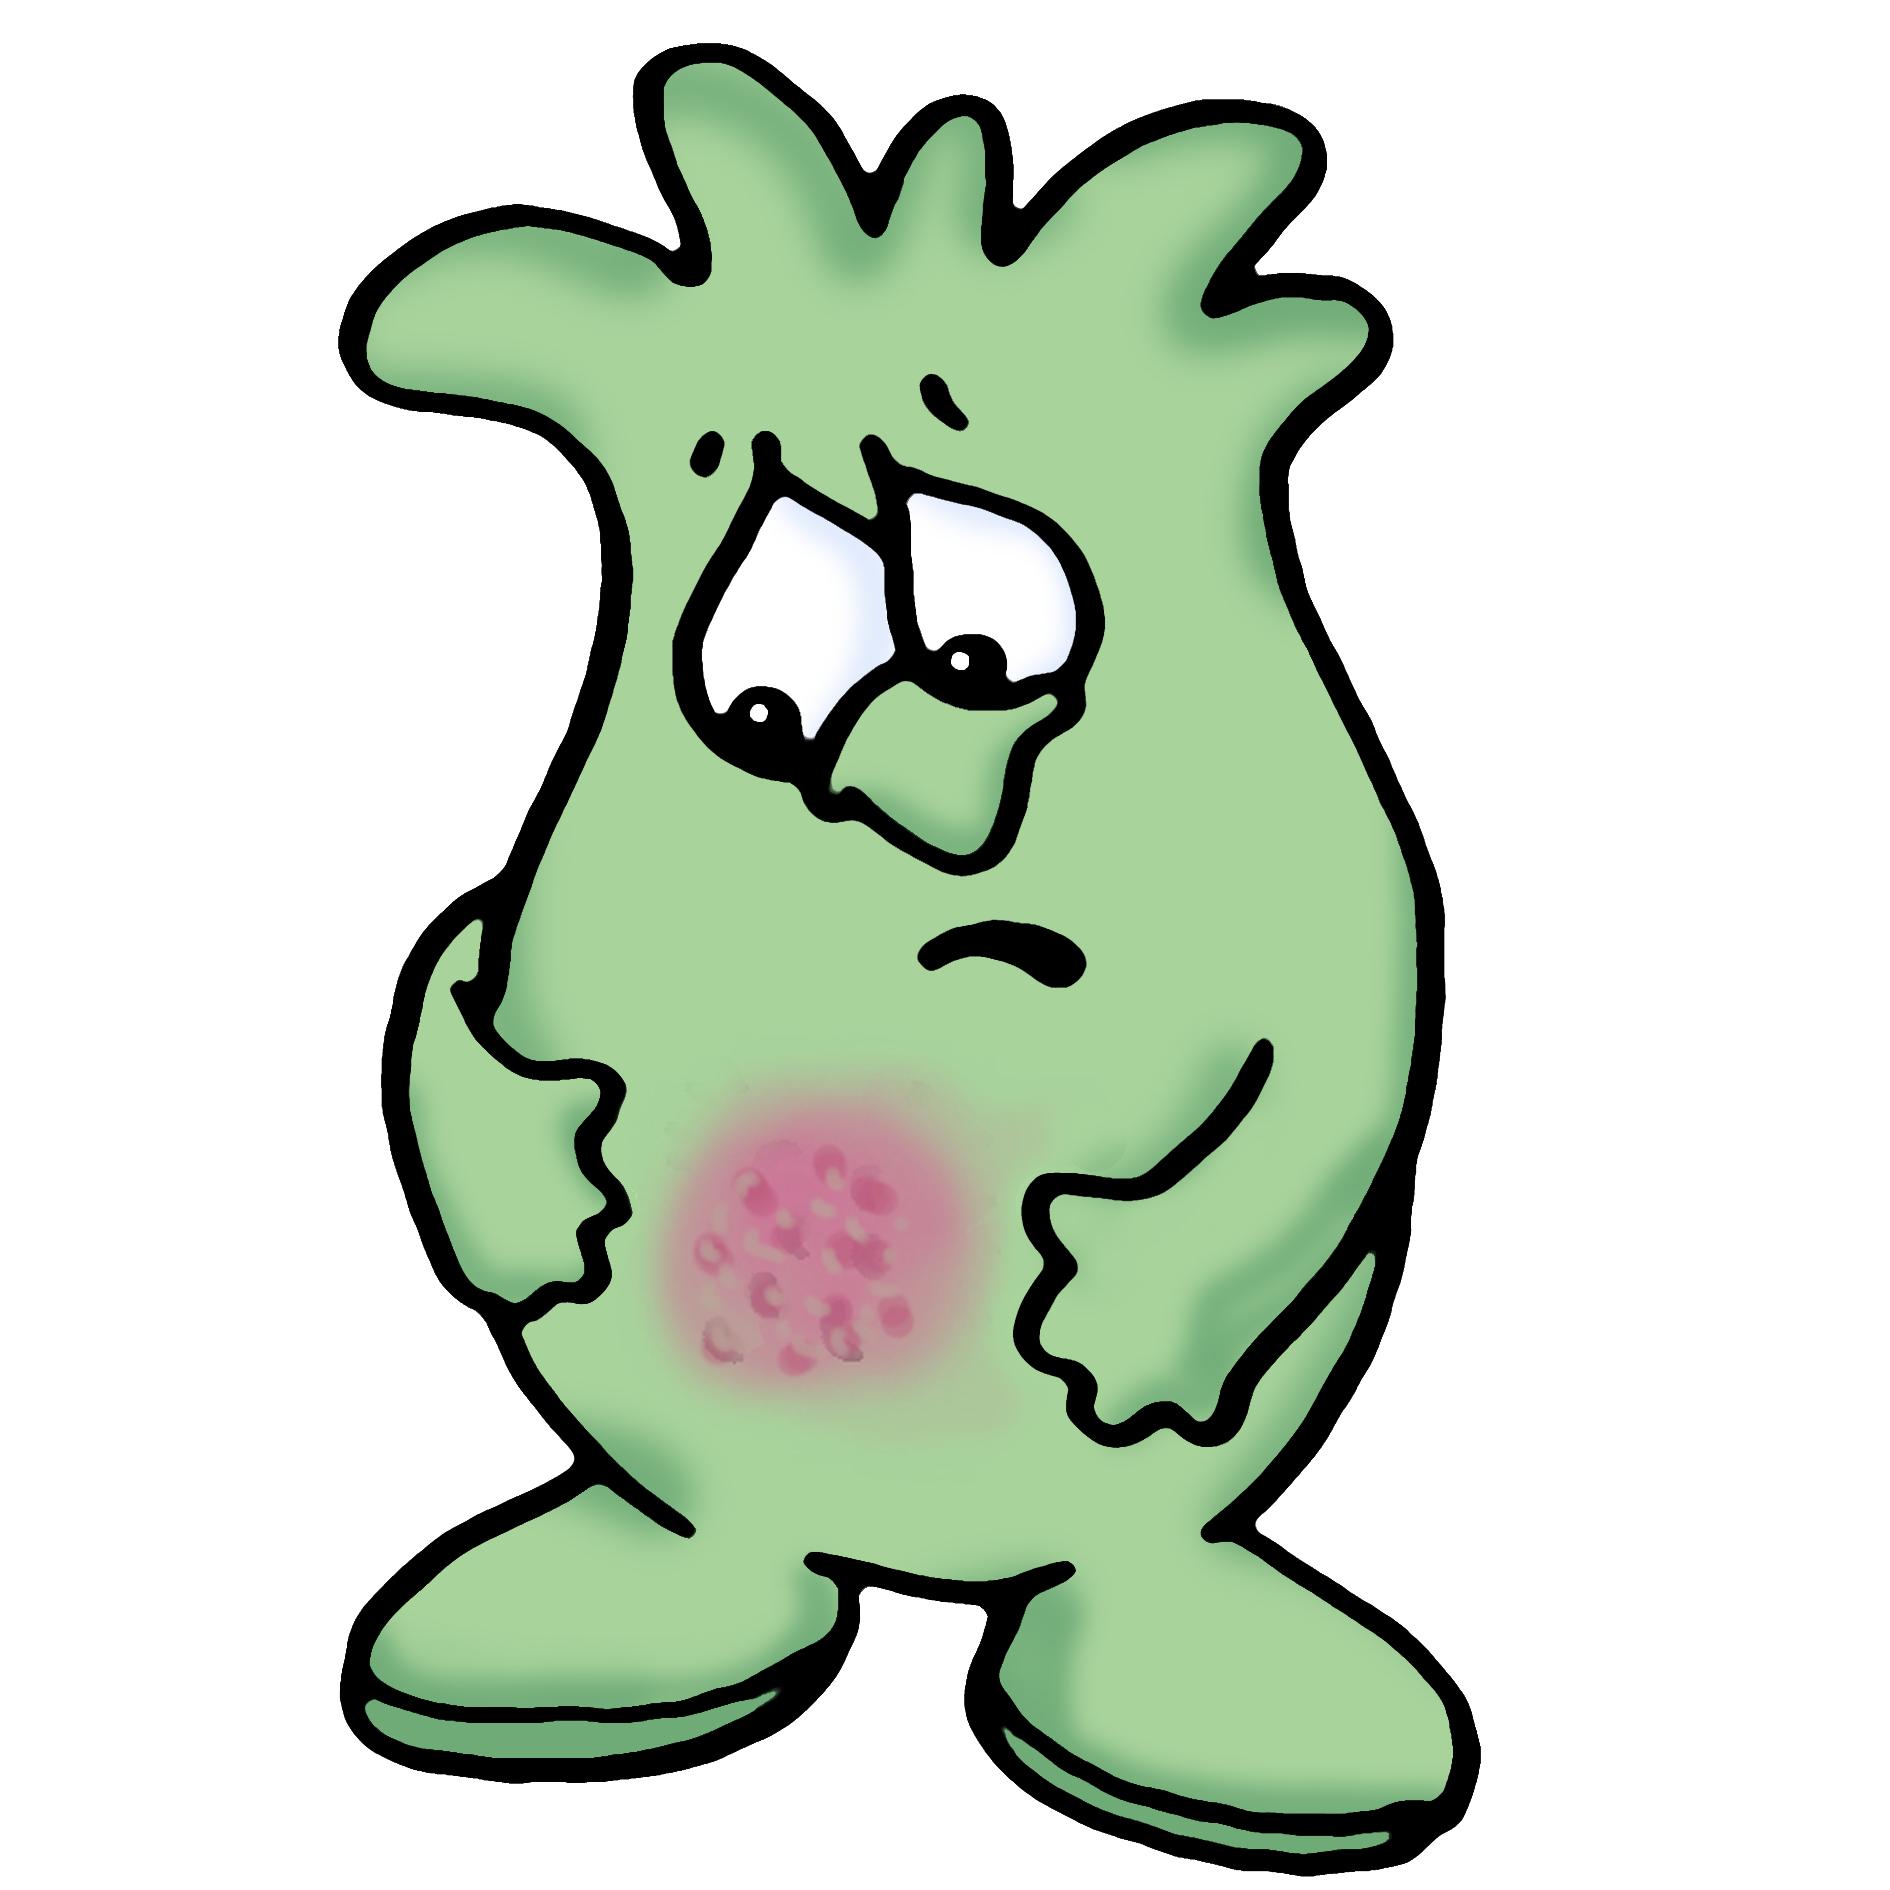 Infection Cartoon Images ~ 6 Warning Signs That Indicate Your Heart ...